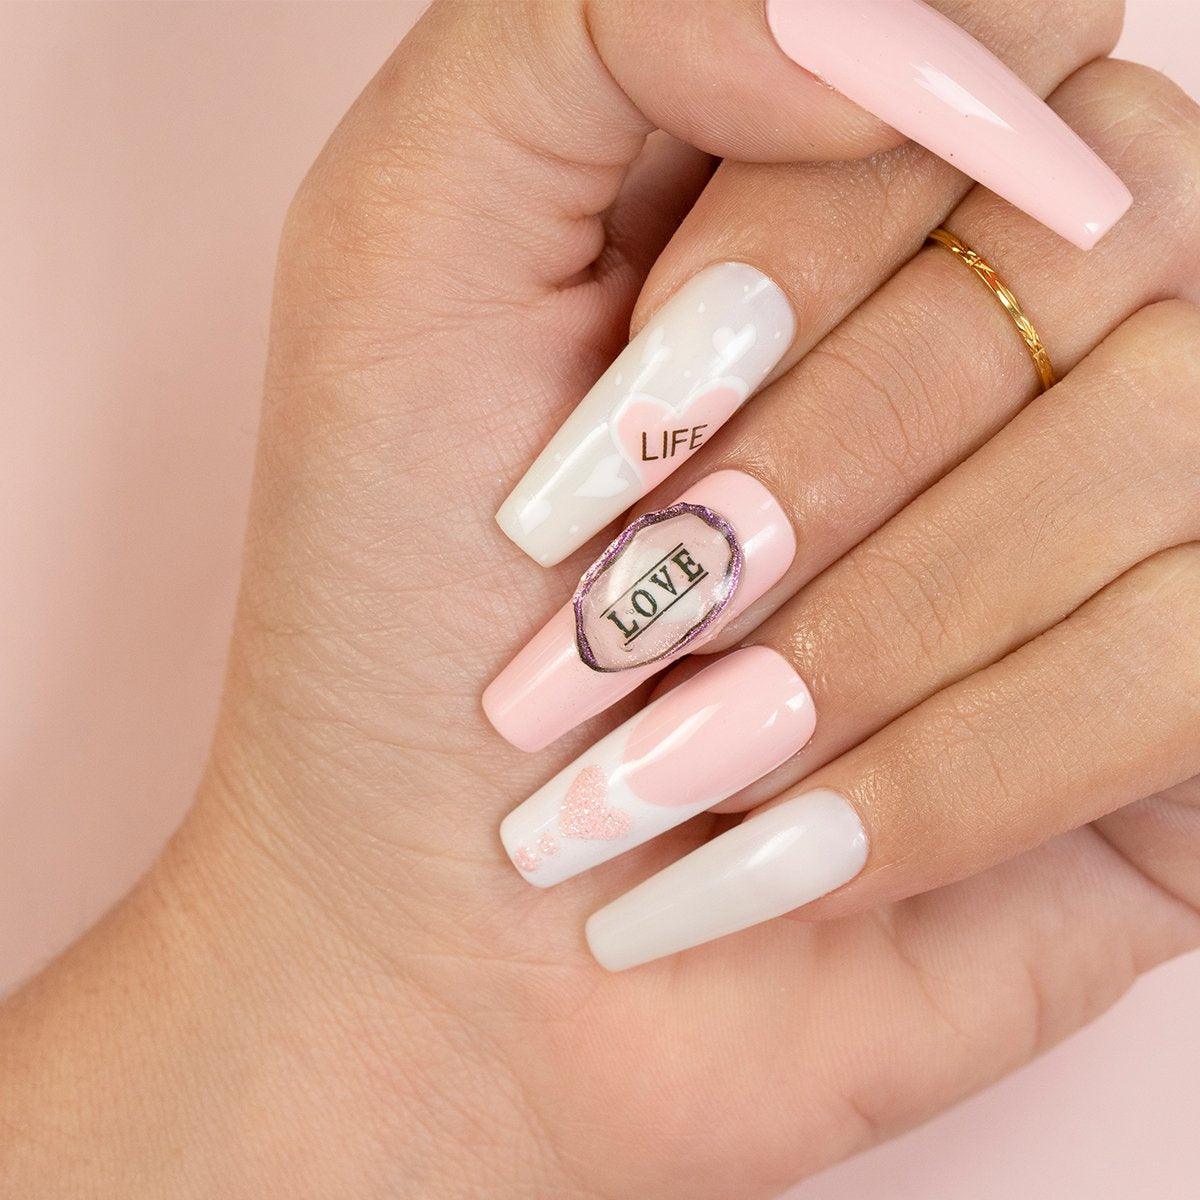 DND Gel Nail Polish Duo - 603 Neutral Colors - Dolce Pink by DND - Daisy Nail Designs sold by DTK Nail Supply